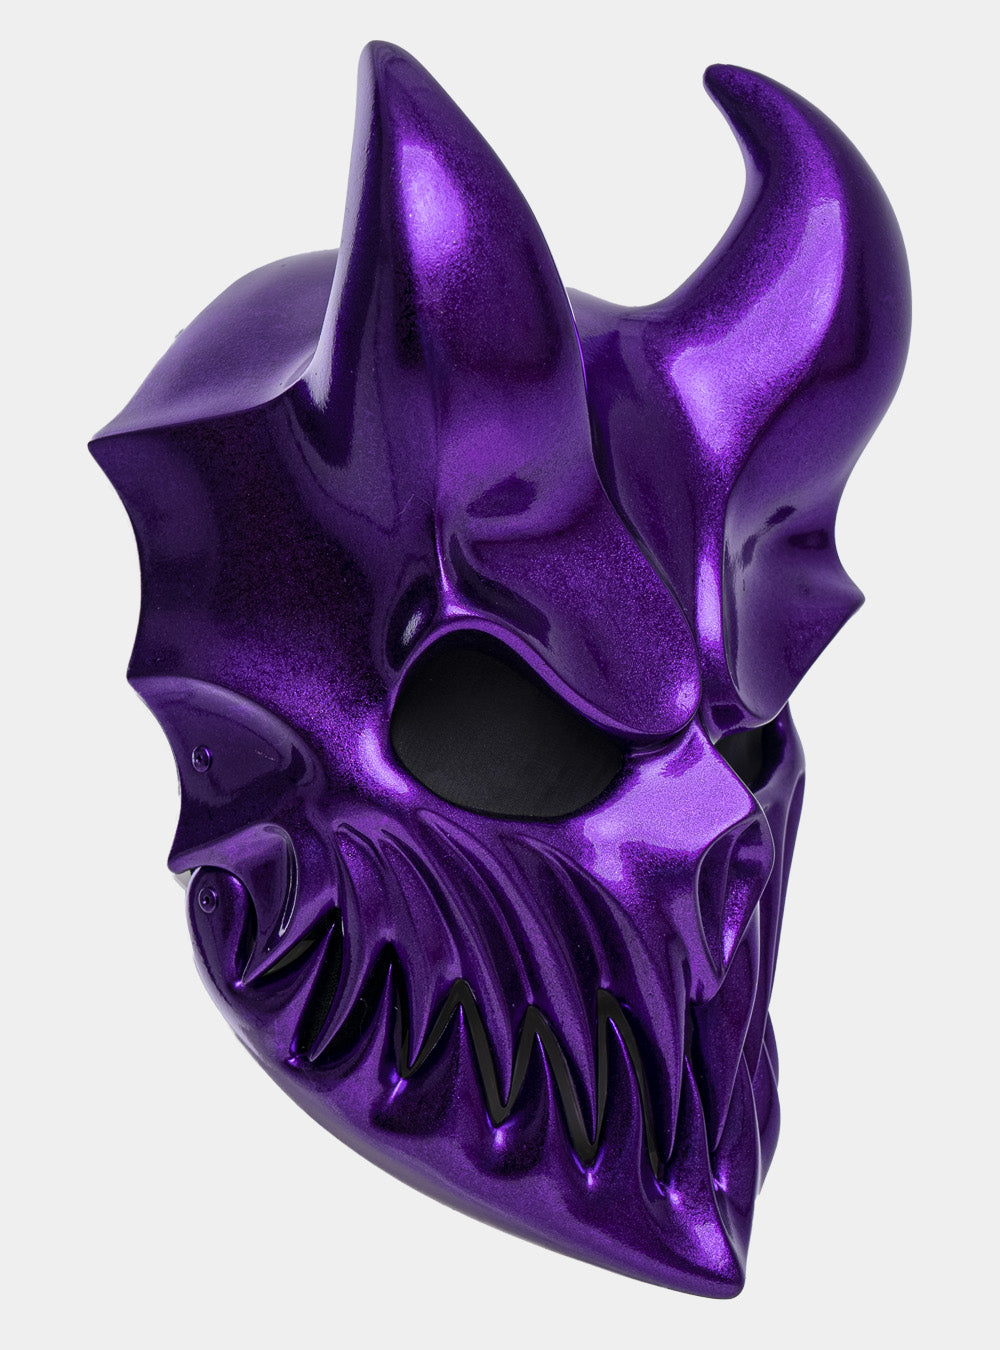 (SLAUGHTER TO PREVAIL) ALEX TERRIBLE MASK “KID OF DARKNESS” (PURPLE)